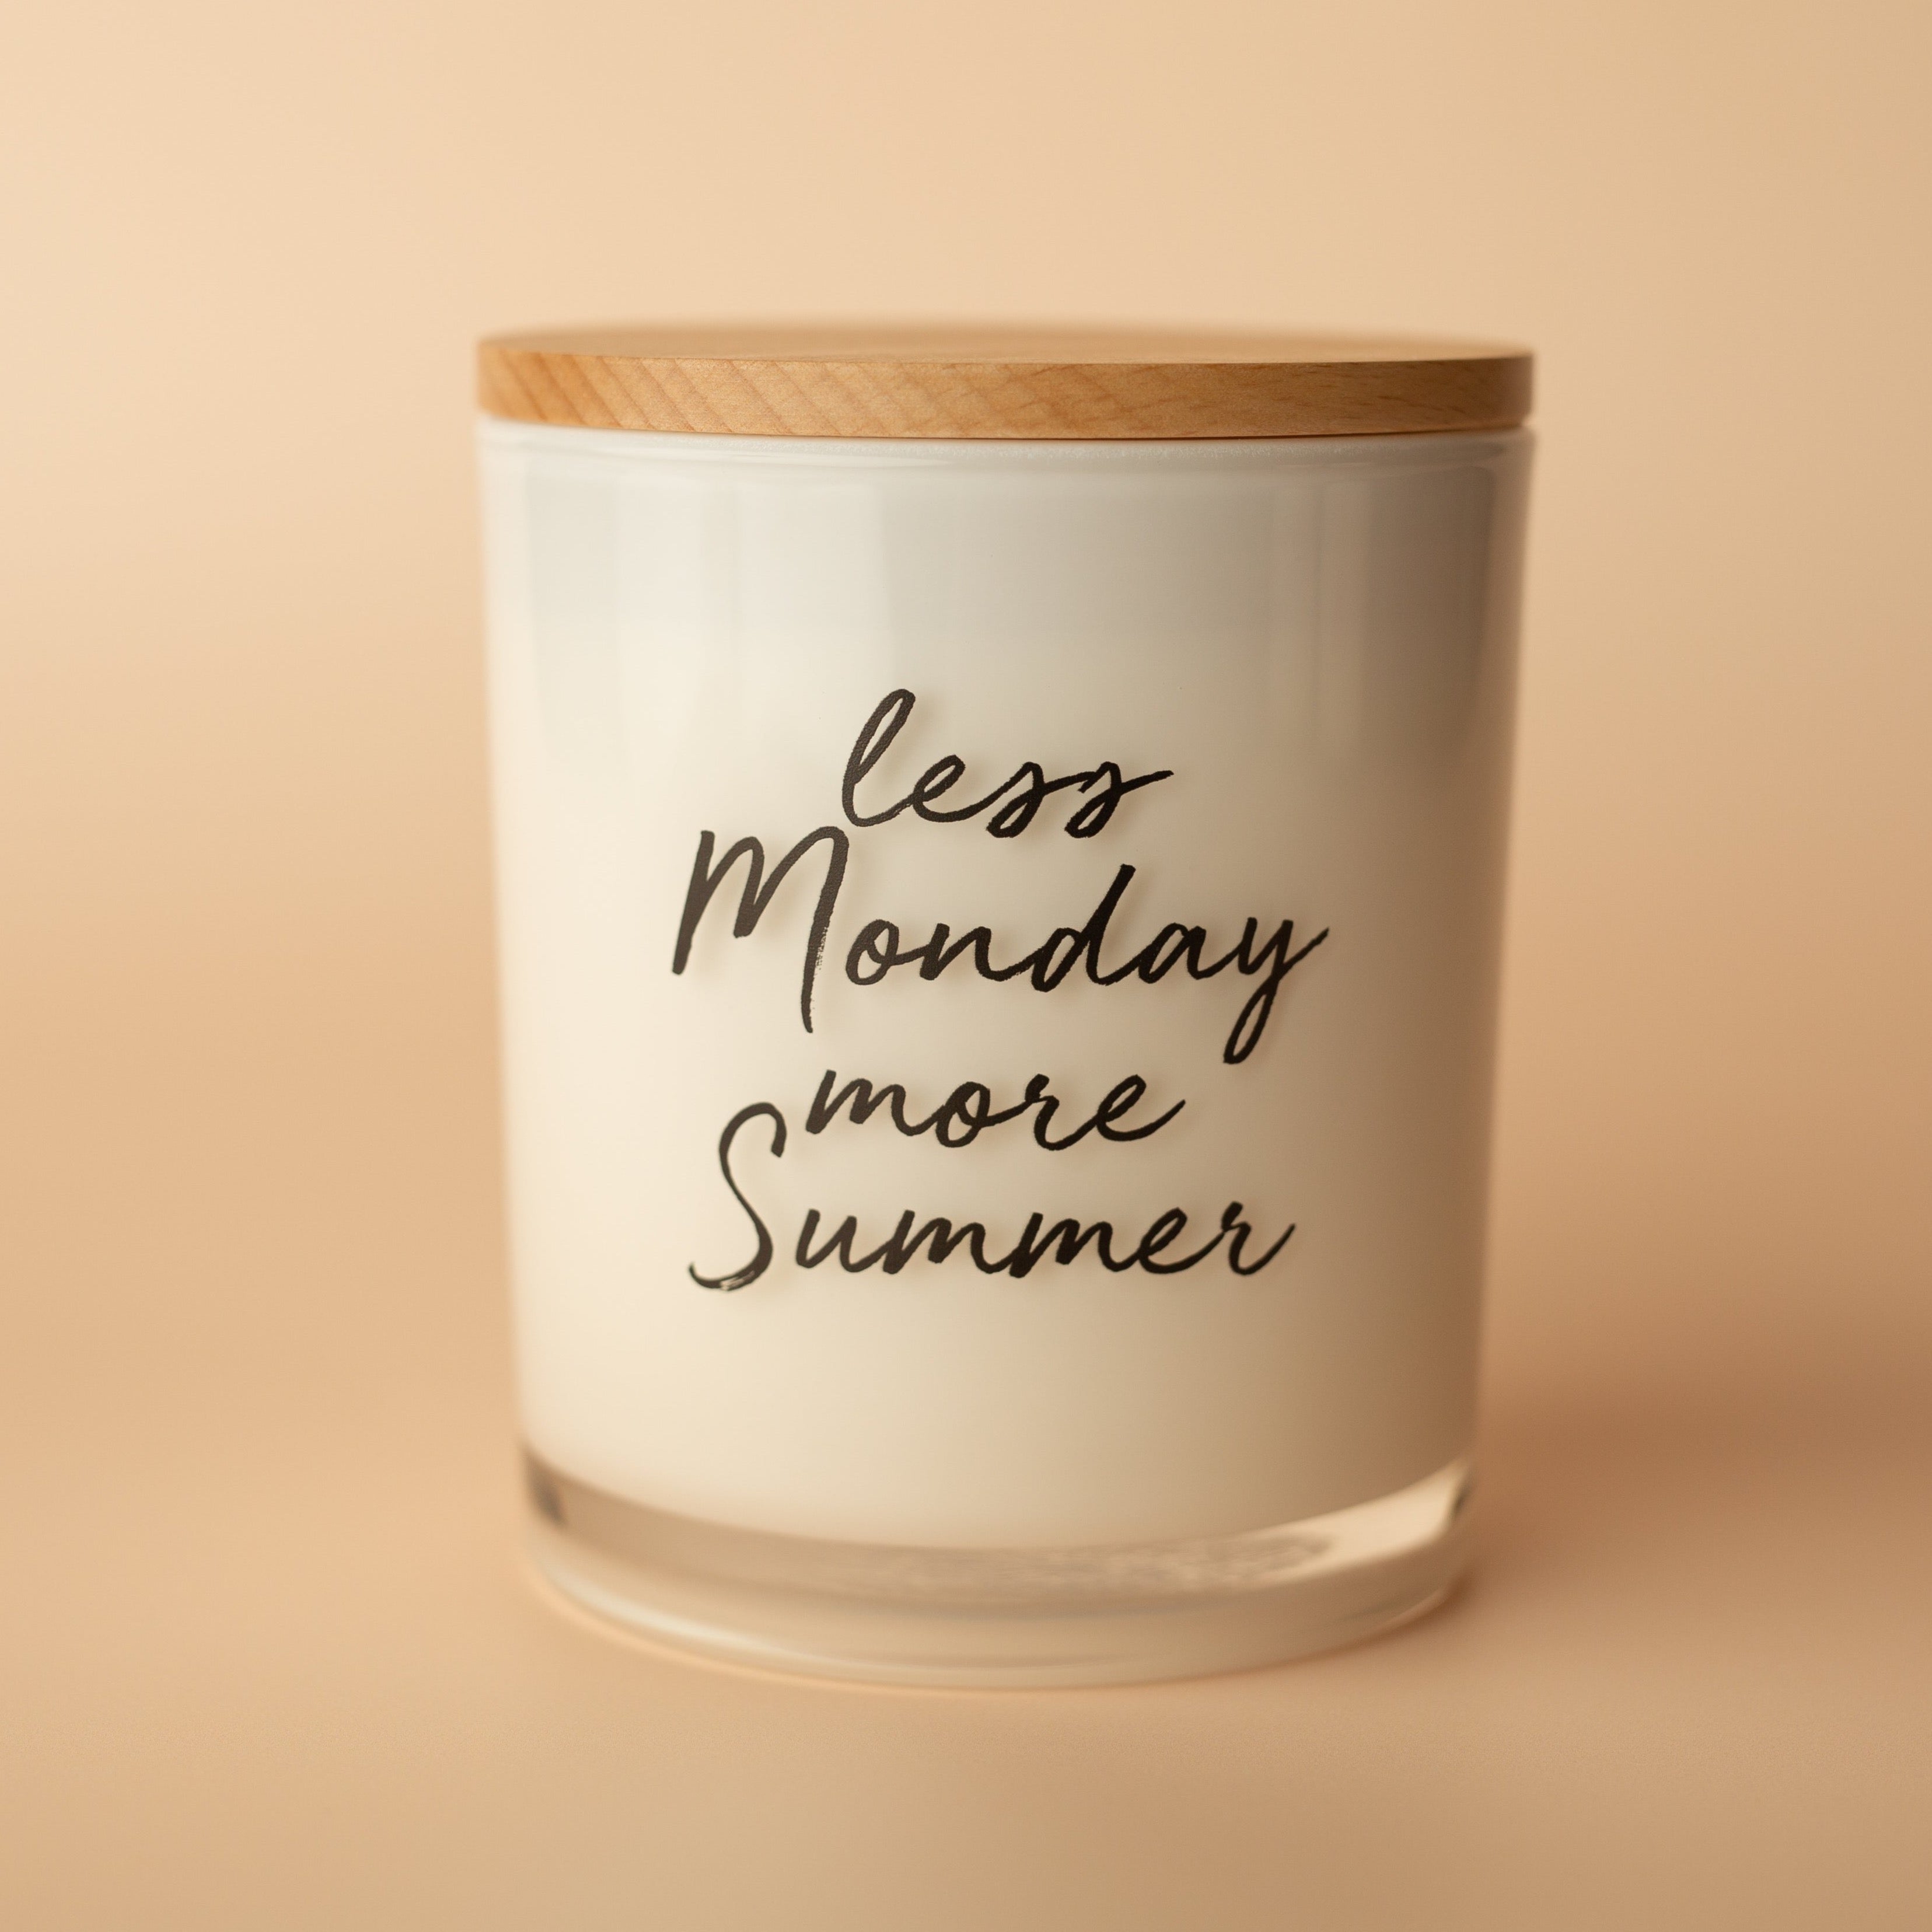 LESS%20MONDAY%20MORE%20SUMMER%20CANDLE